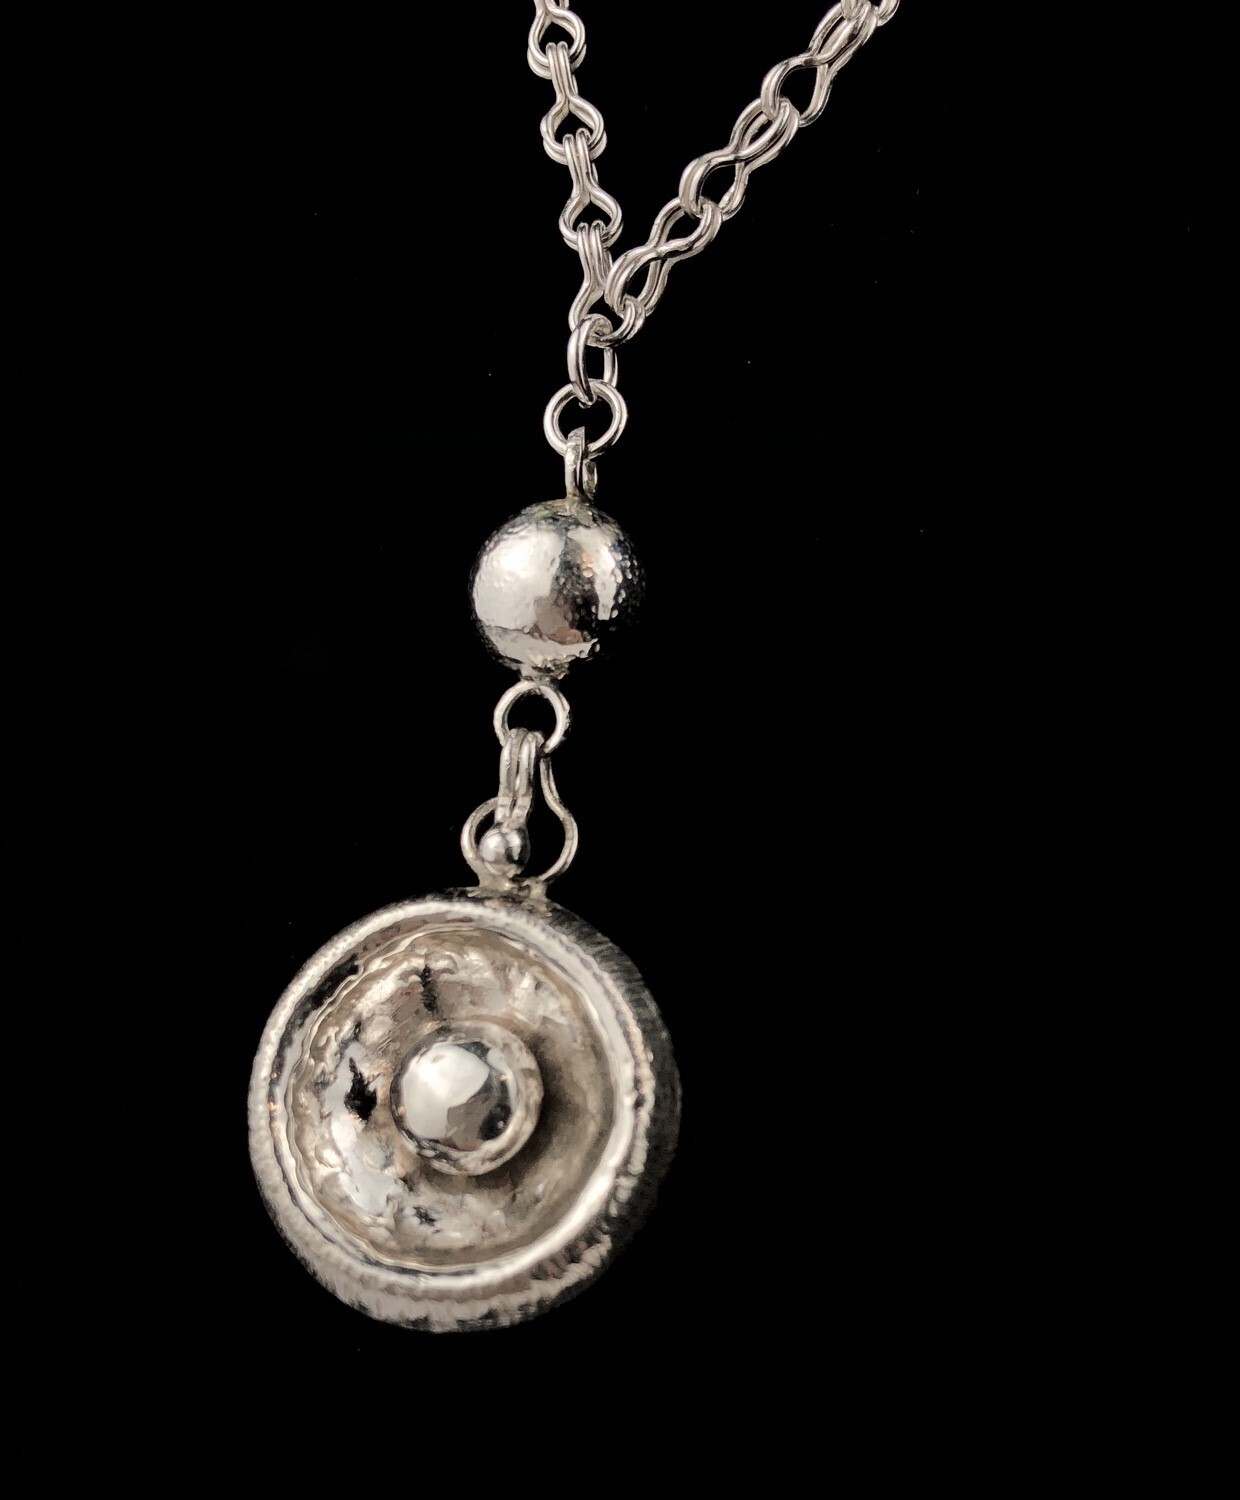 Round Concave Pendant with Pinched Loop in Loop Chain 18